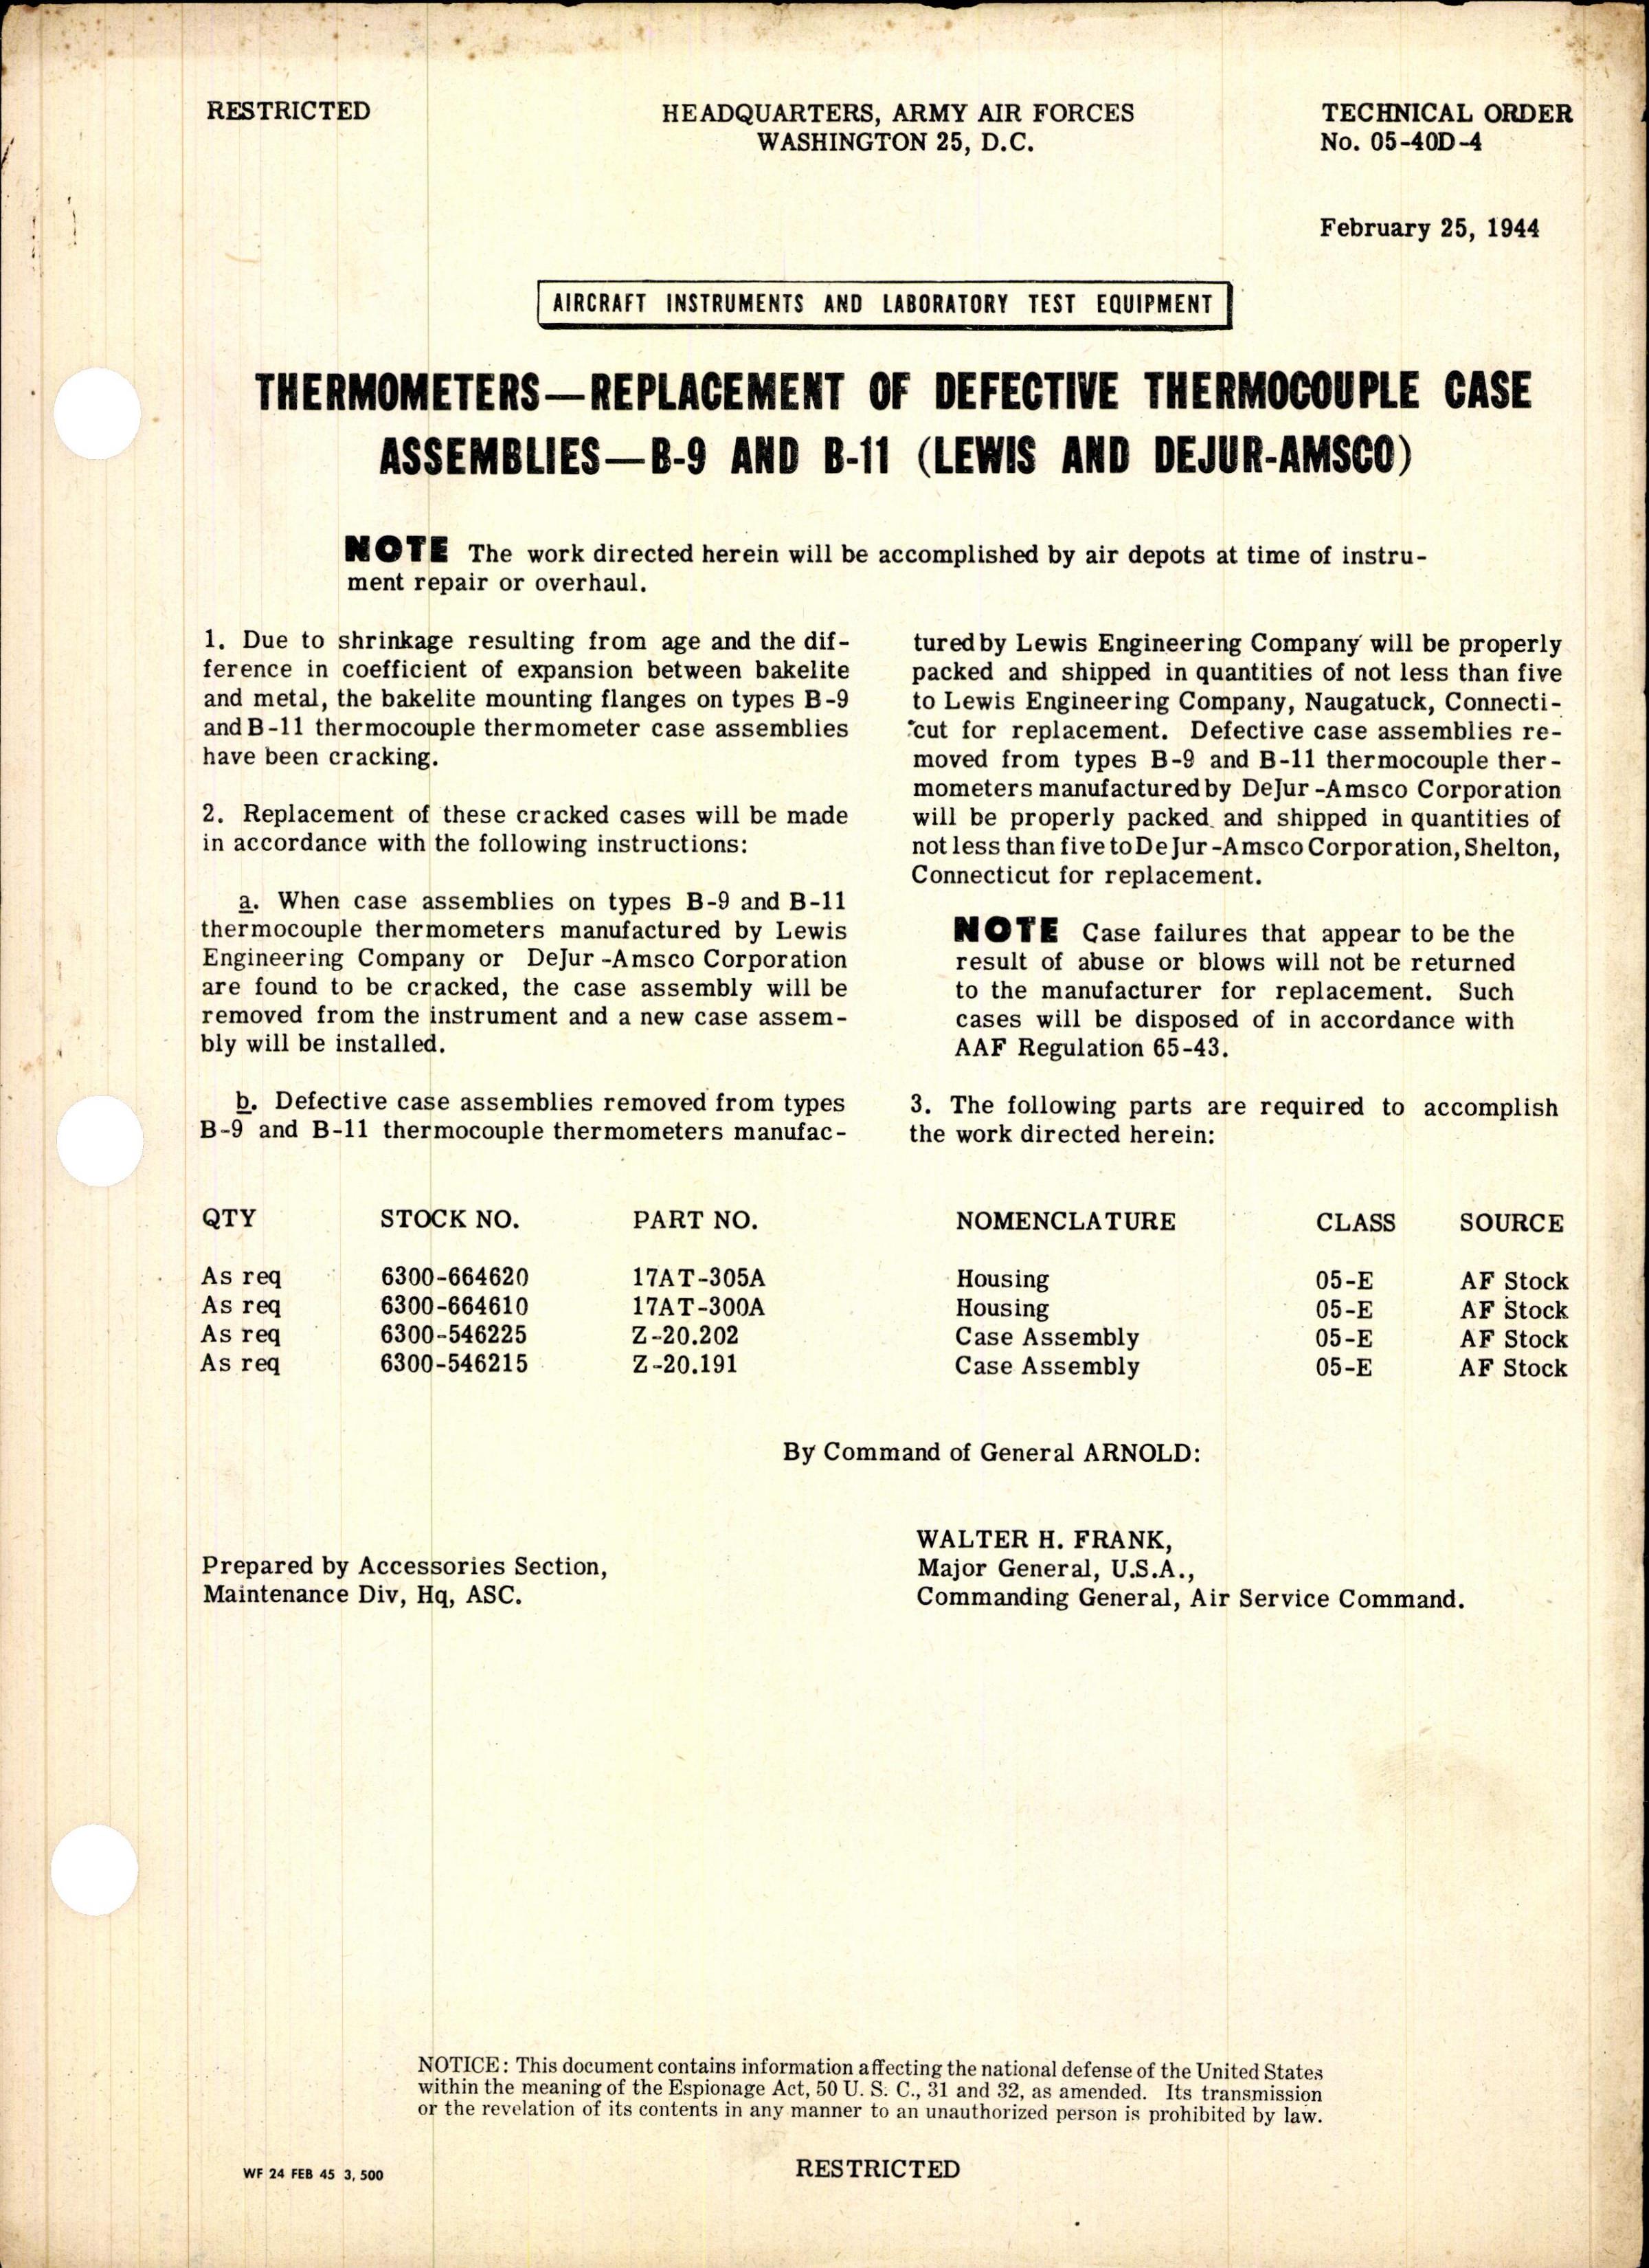 Sample page 1 from AirCorps Library document: Replacement of Defective Thermocouple Thermometer Case Assemblies B-9 and B-11